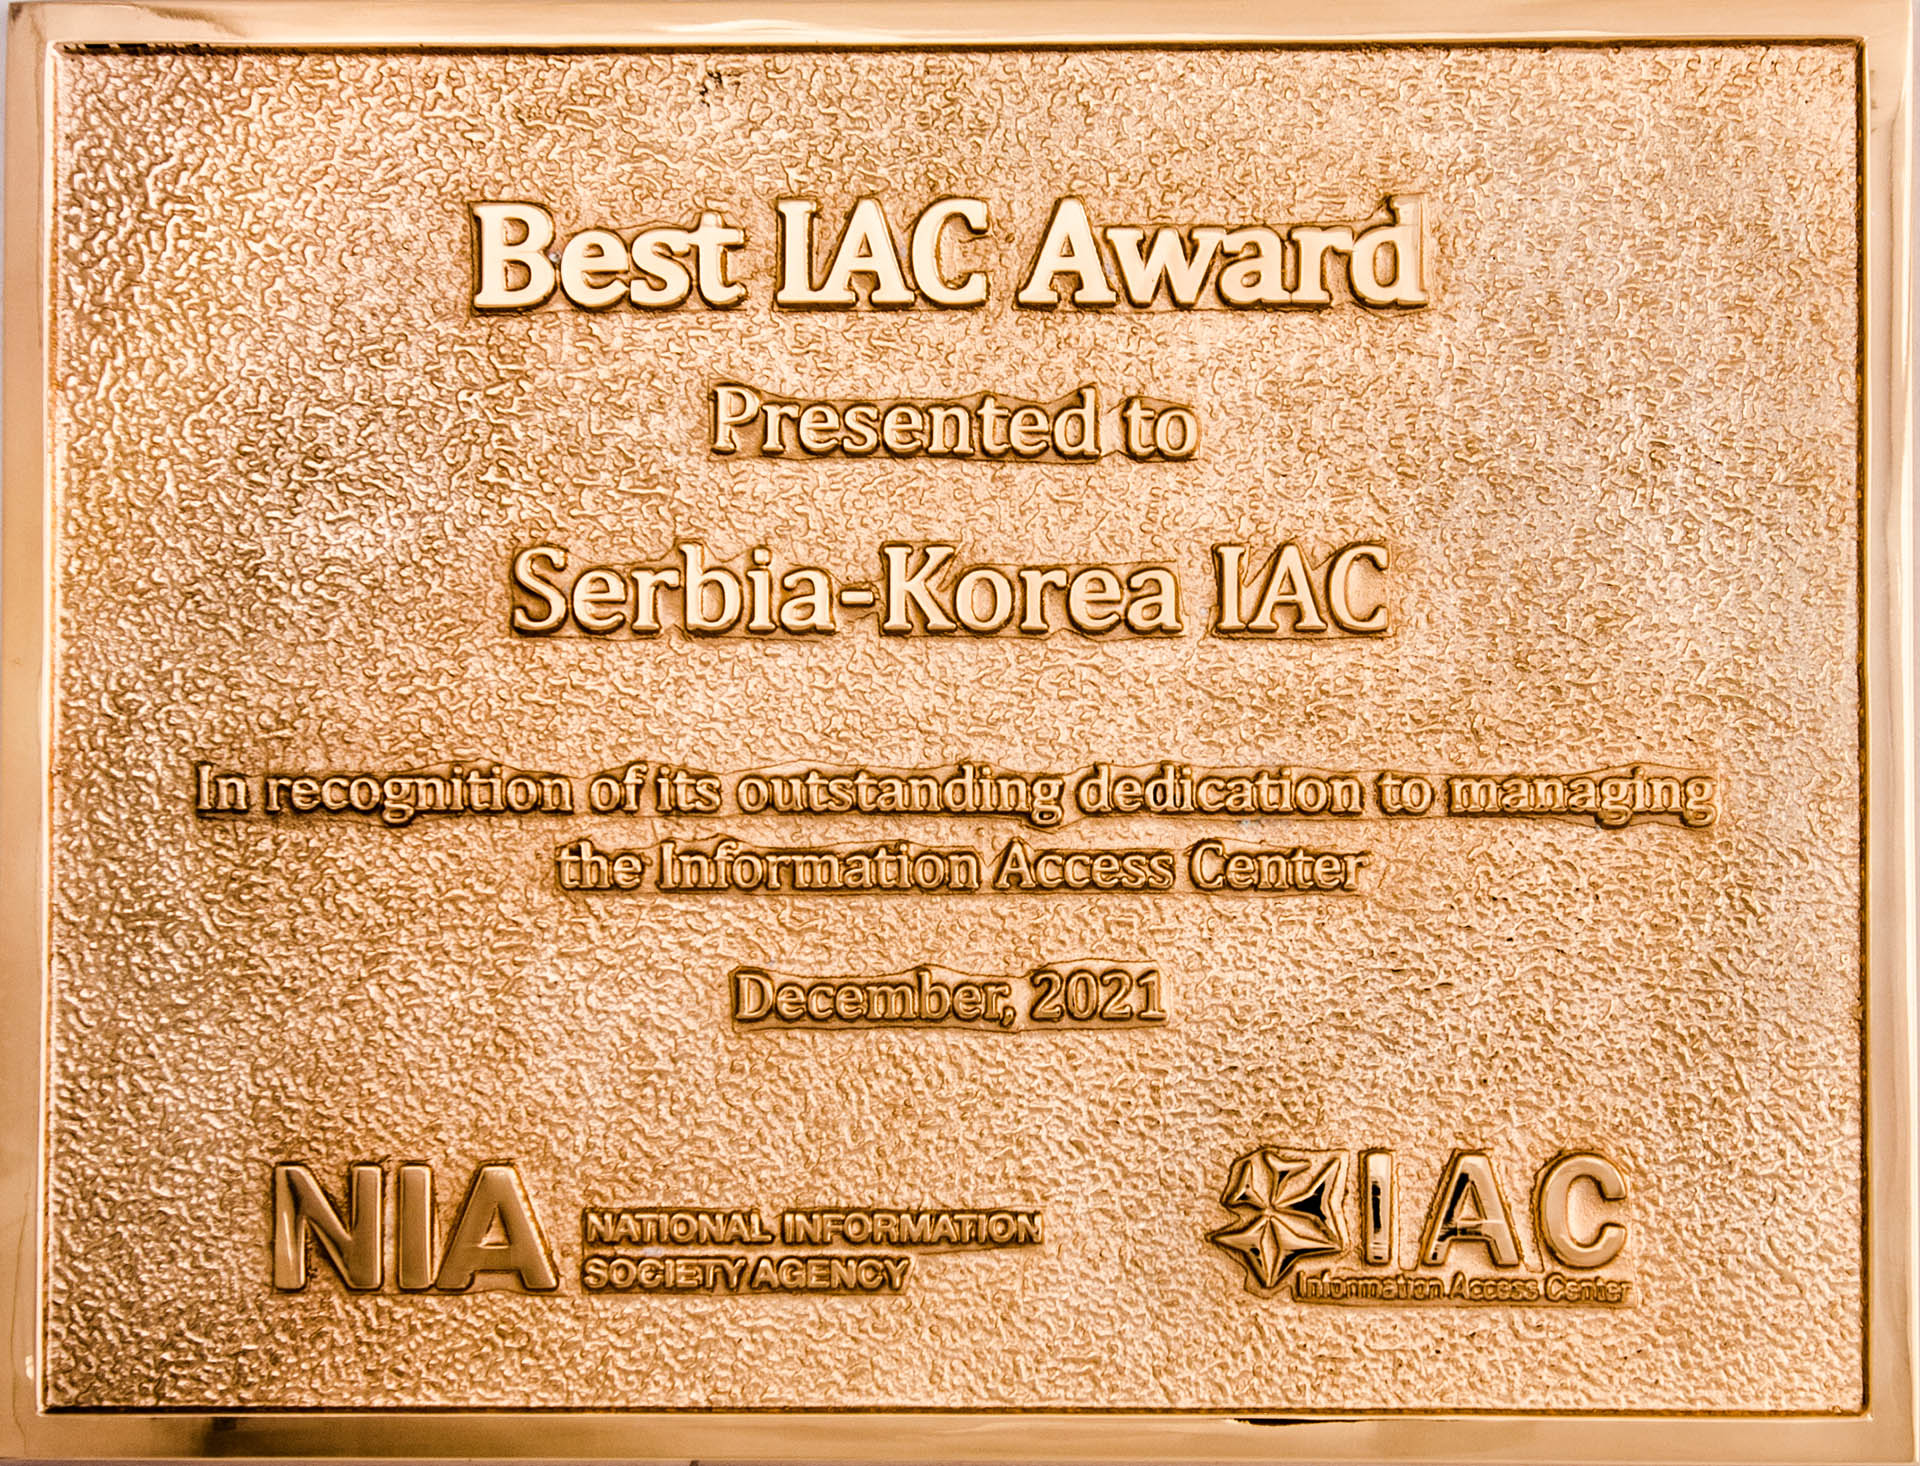 GOLD PLAQUE AWARDED TO SKIP CENTER FOR THE BEST IT ACCESS CENTER IN THE WORLD